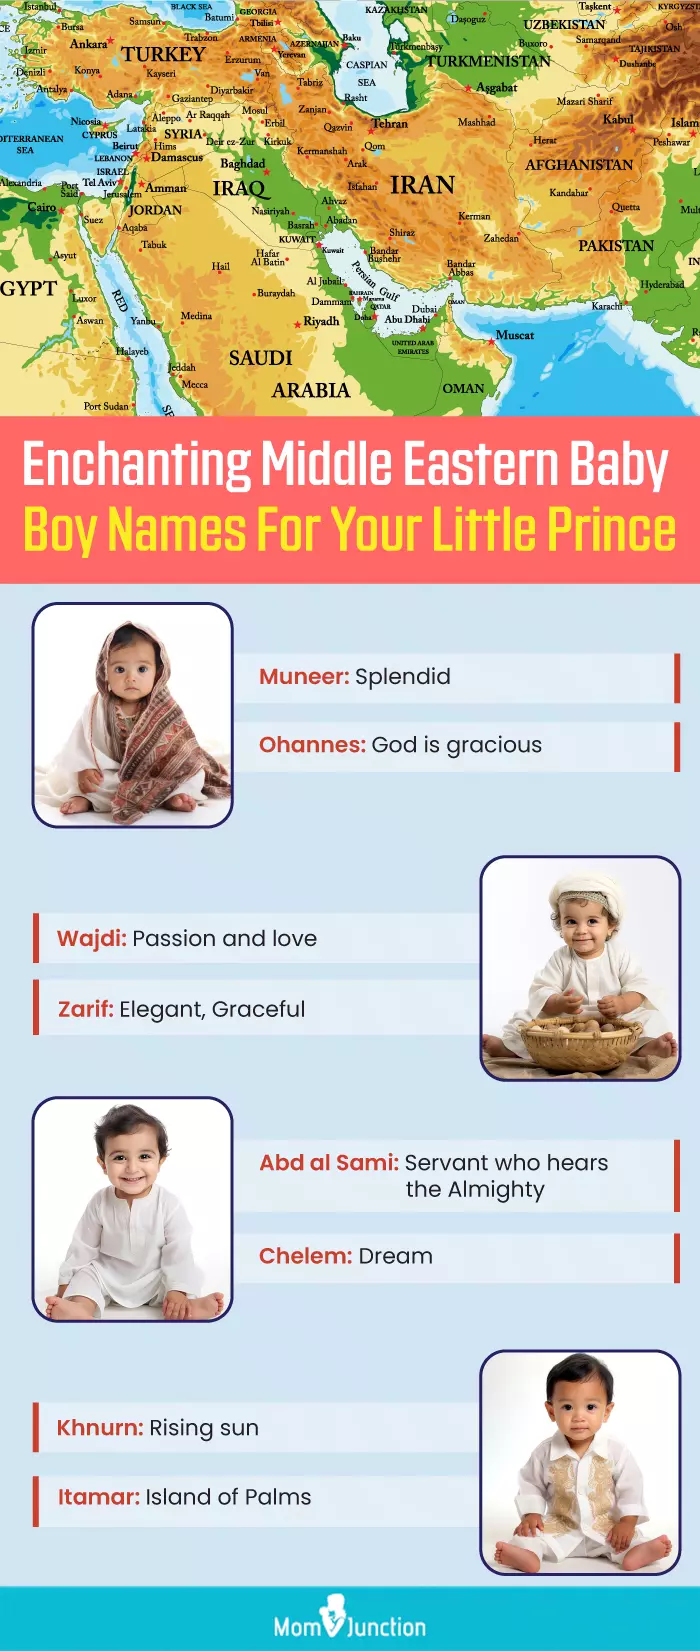 enchanting middle eastern baby boy names for your little prince (infographic)